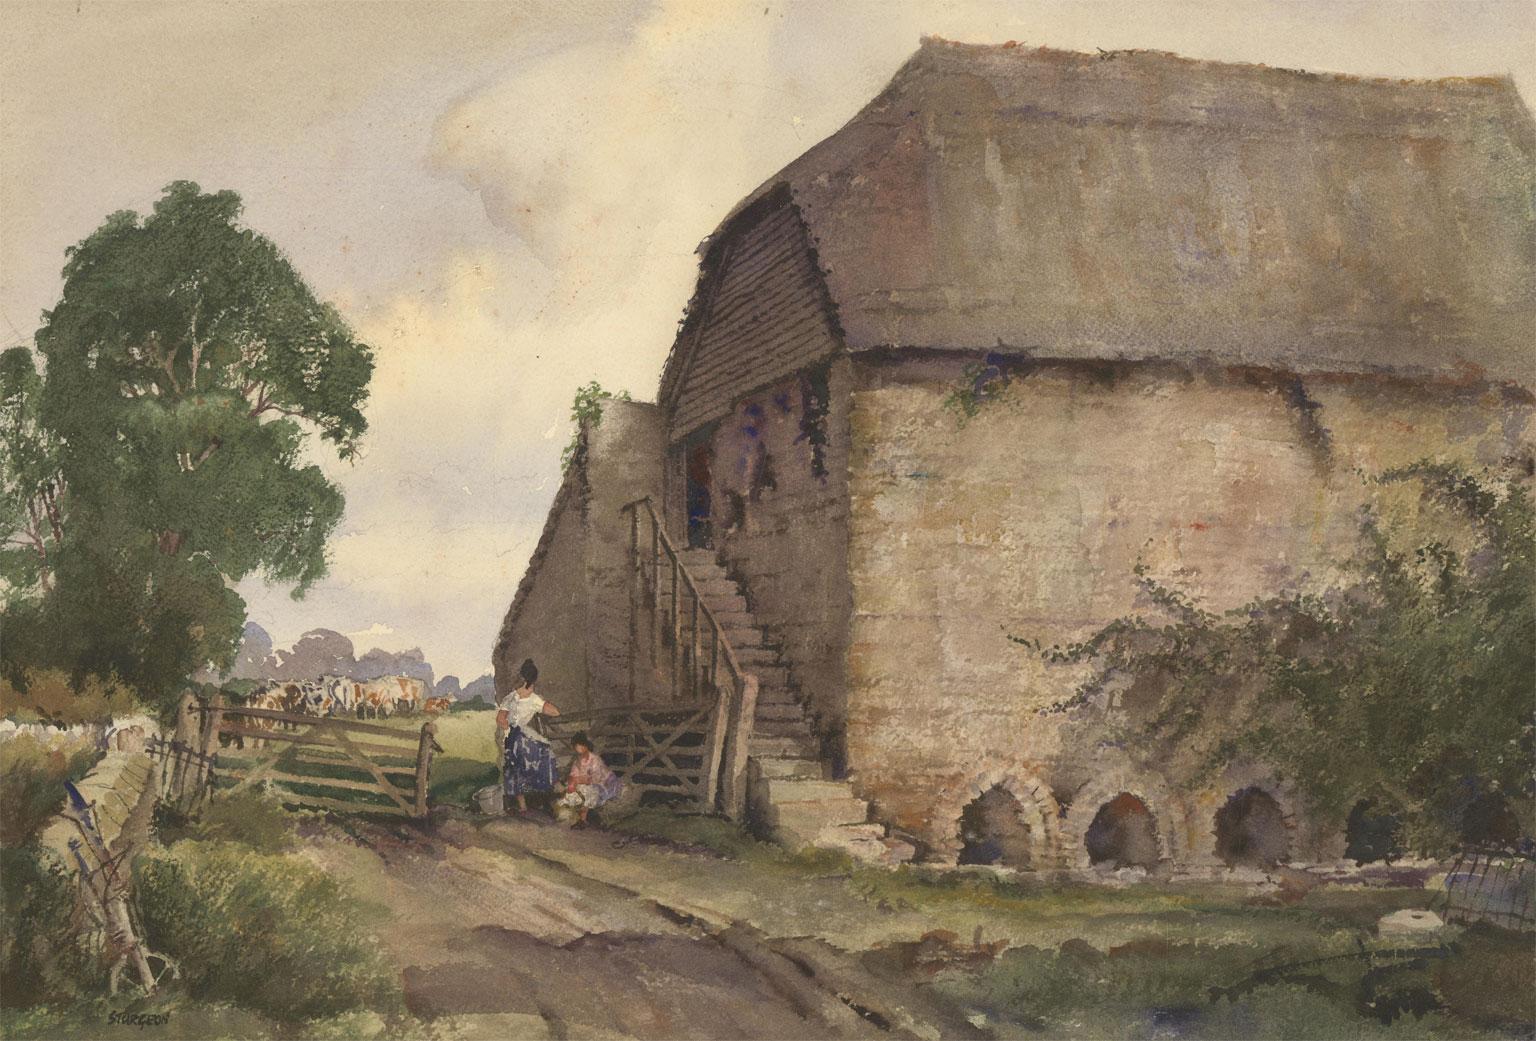 A fine mid to late 20th century watercolour by English artist Eric Richard Sturgeon. This wonderful composition depicts two female figures with vuckets of milk next to a stone farmhouse. A field of dairy cows is visible in the distance.The light